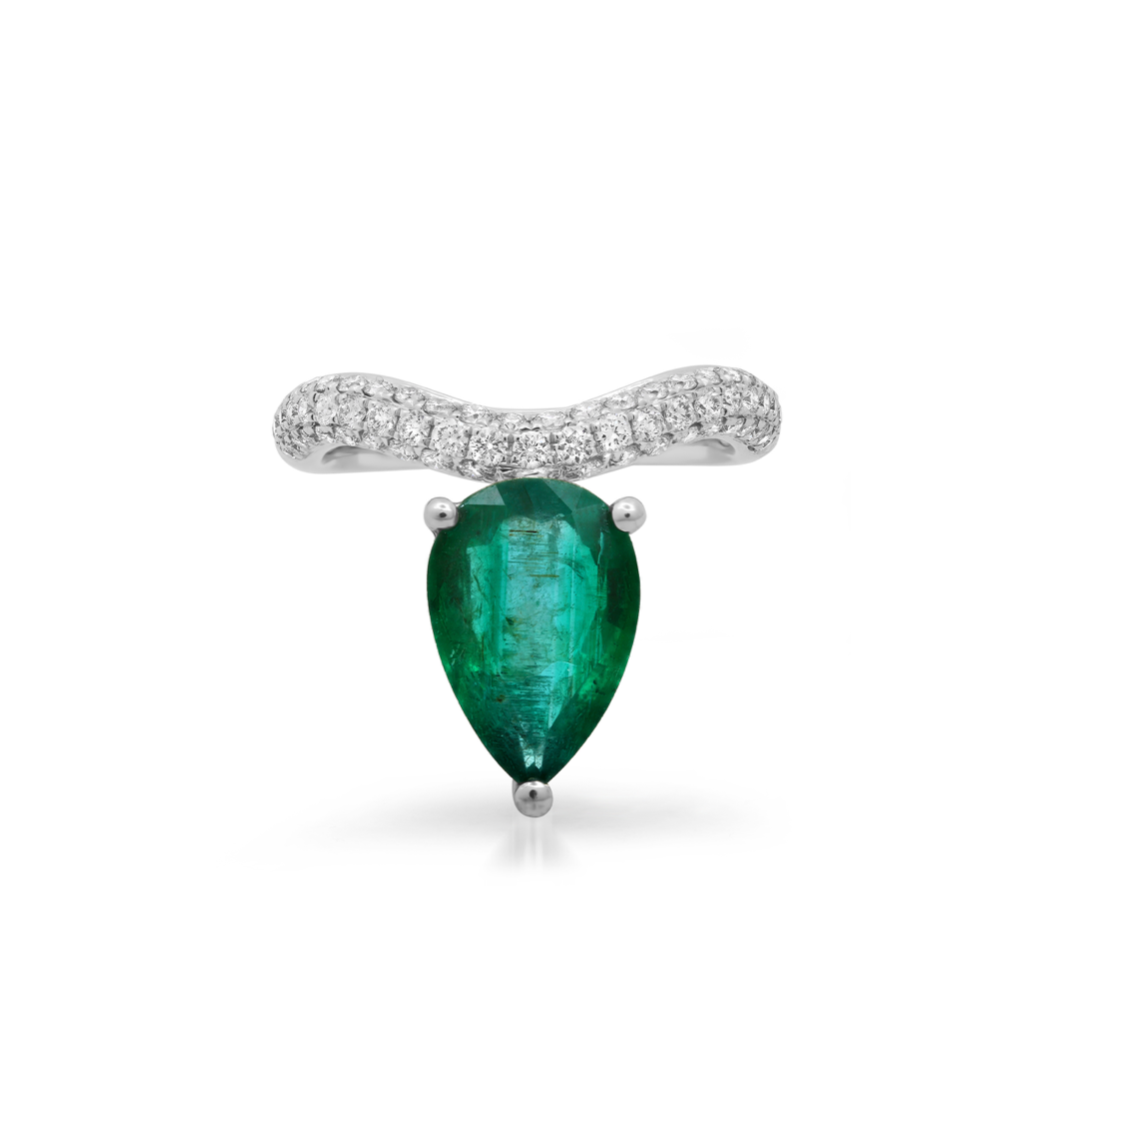 One of a Kind Large Fancy Pear Shape Emerald & Diamond Wave Ring